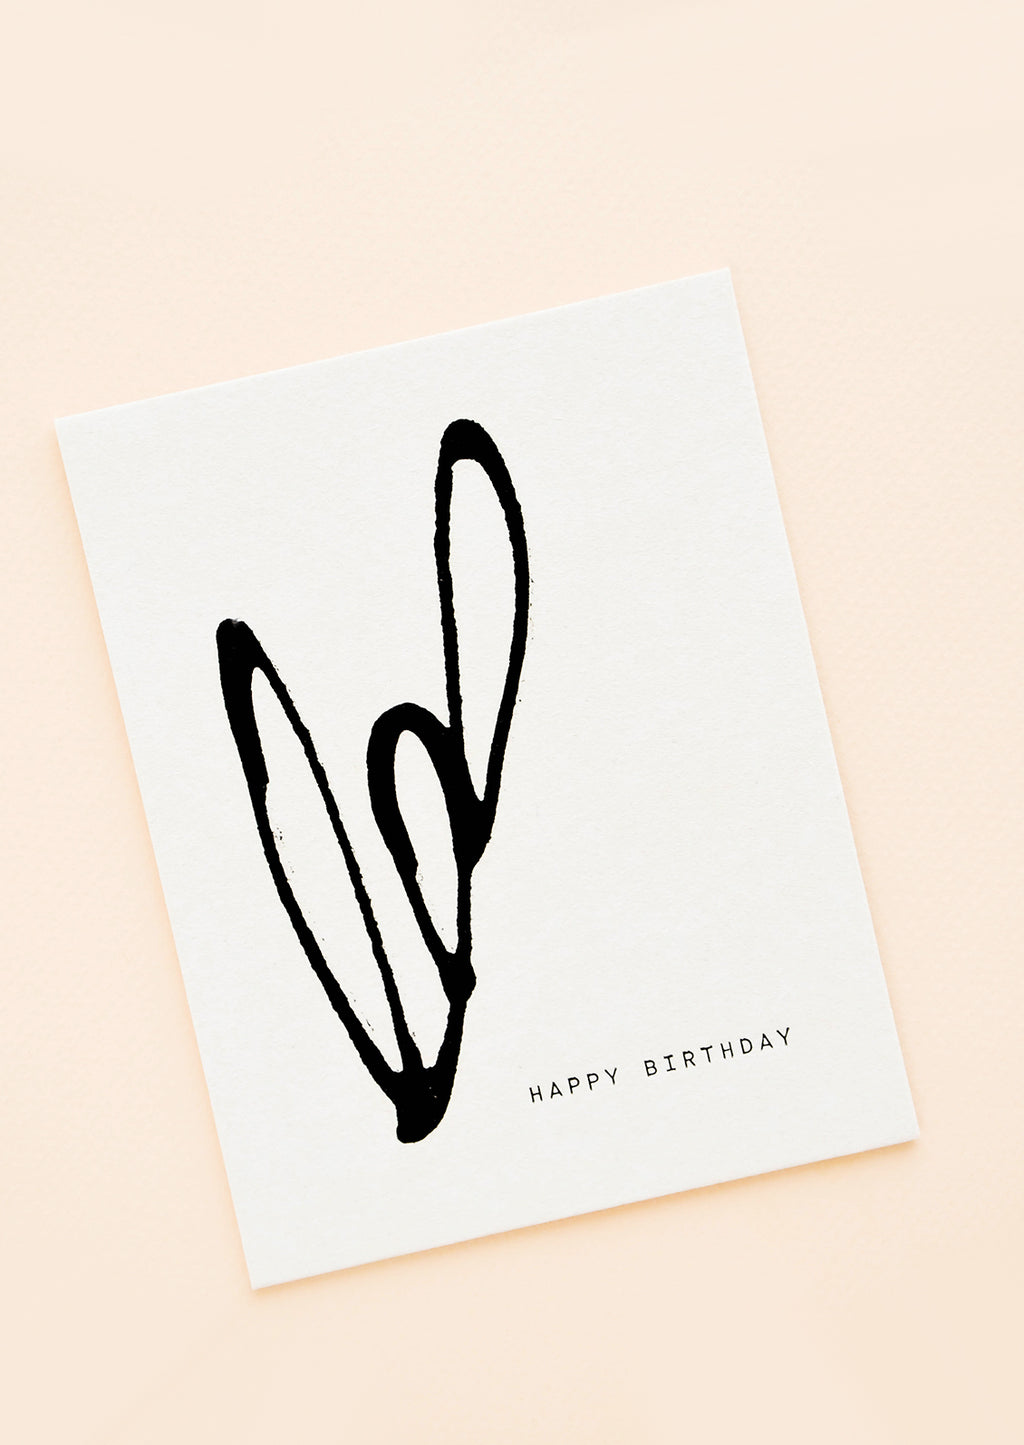 1: A white greeting card reading "happy birthday" with a simple organic design in black paint.